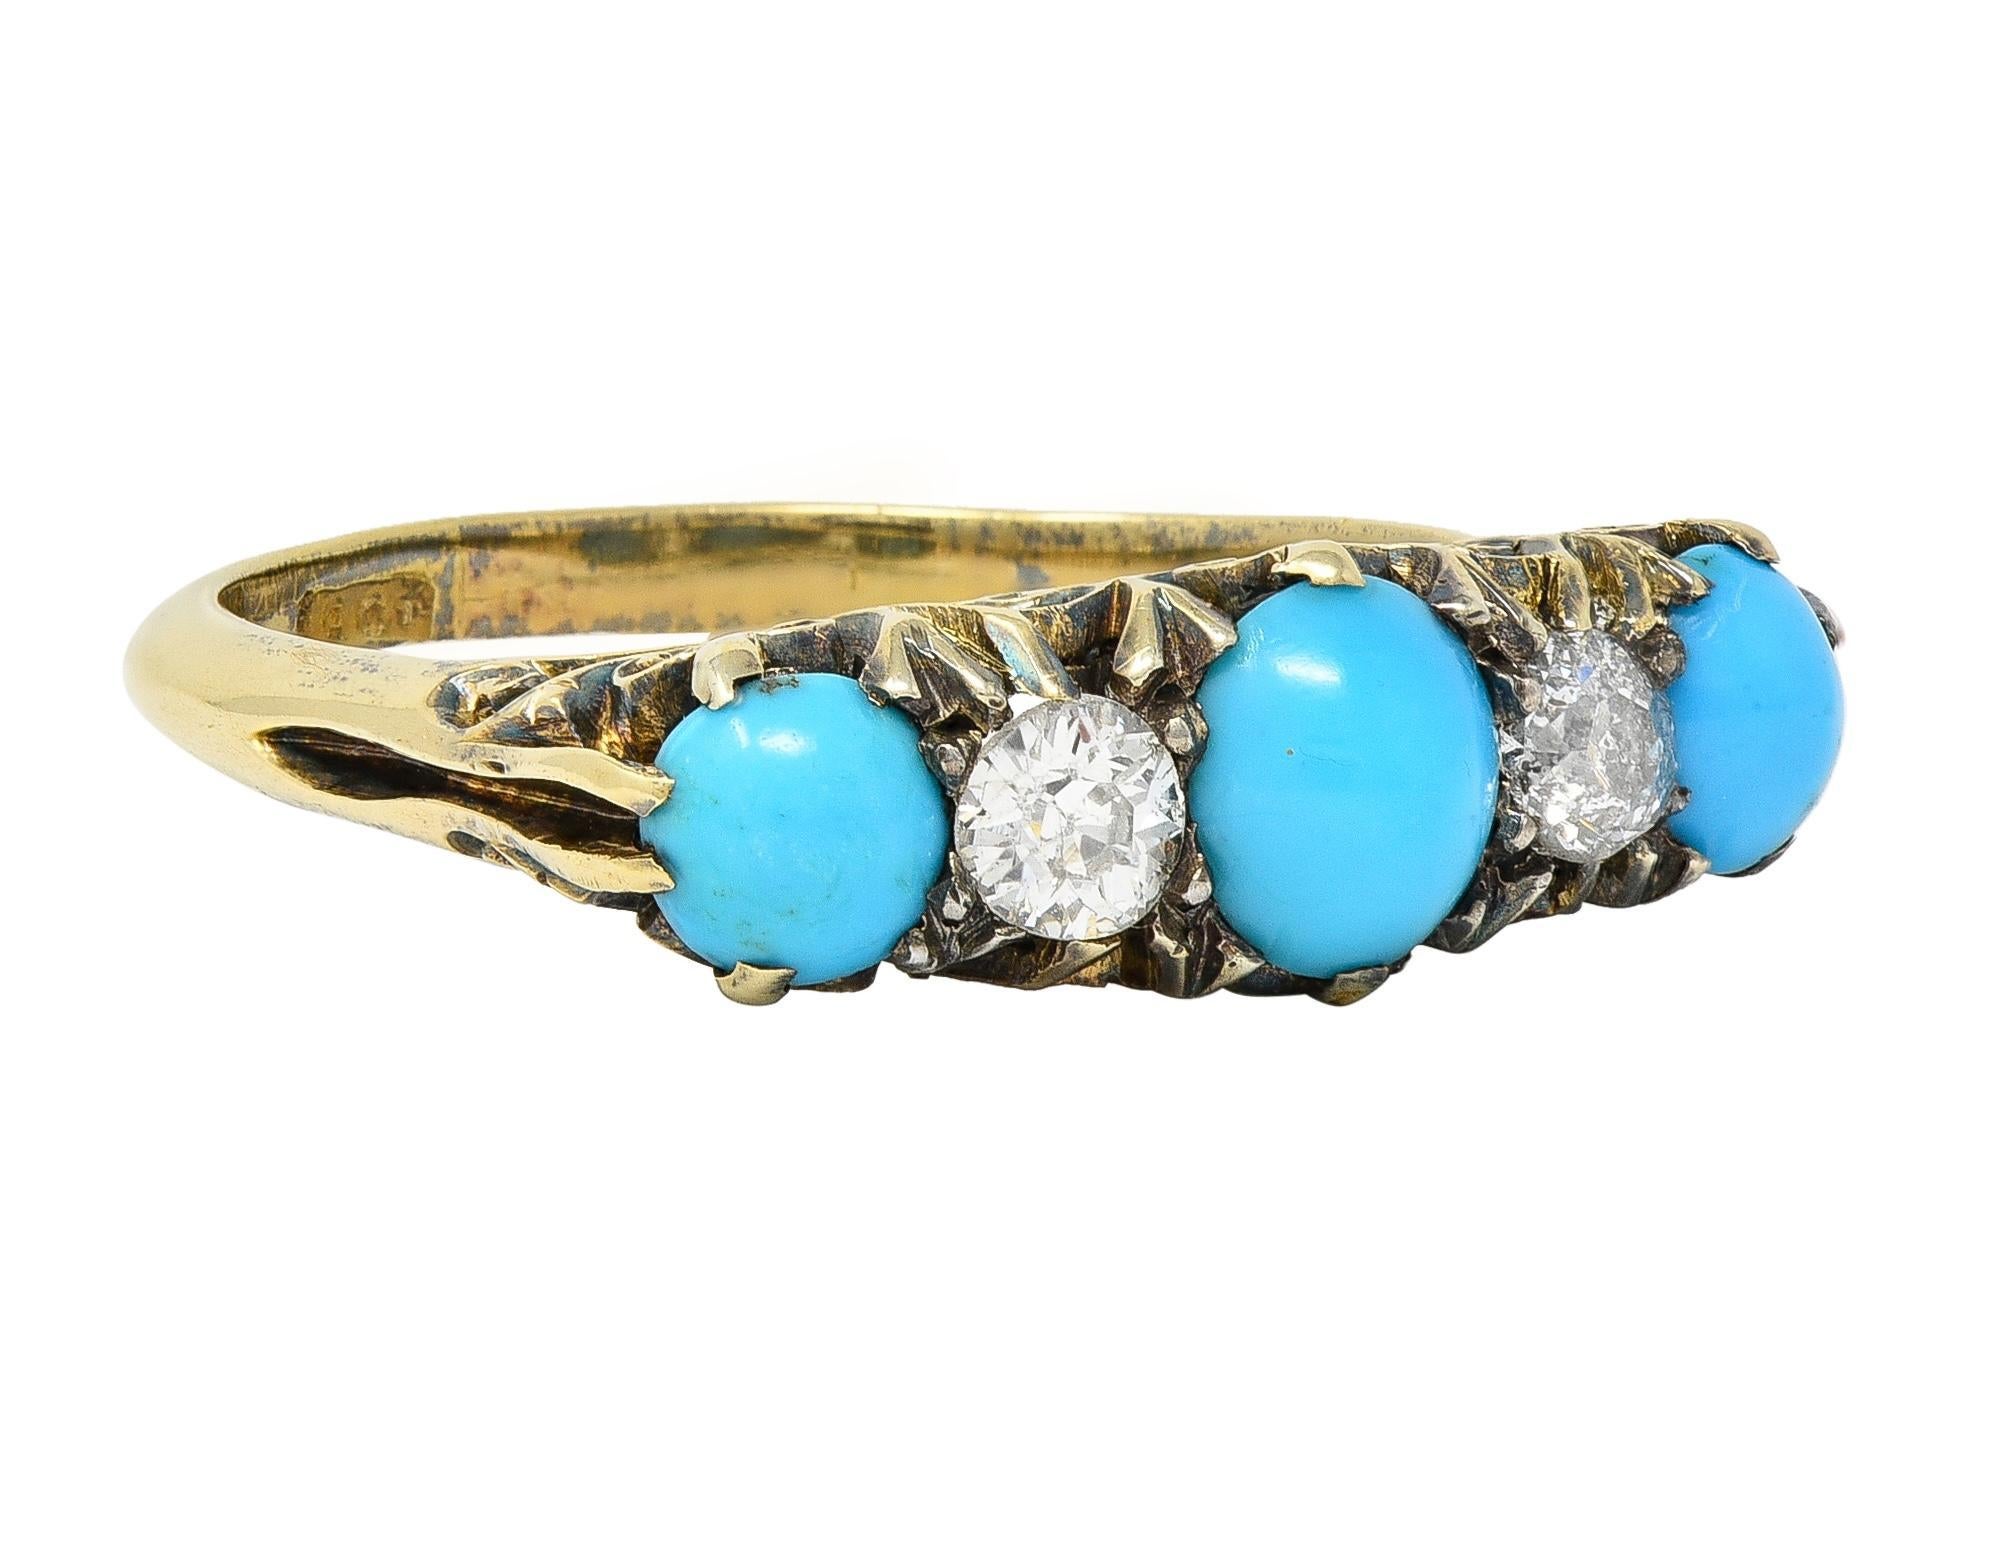 Cabochon Victorian Turquoise Diamond 18 Karat Yellow Gold Scrolling Antique Band Ring